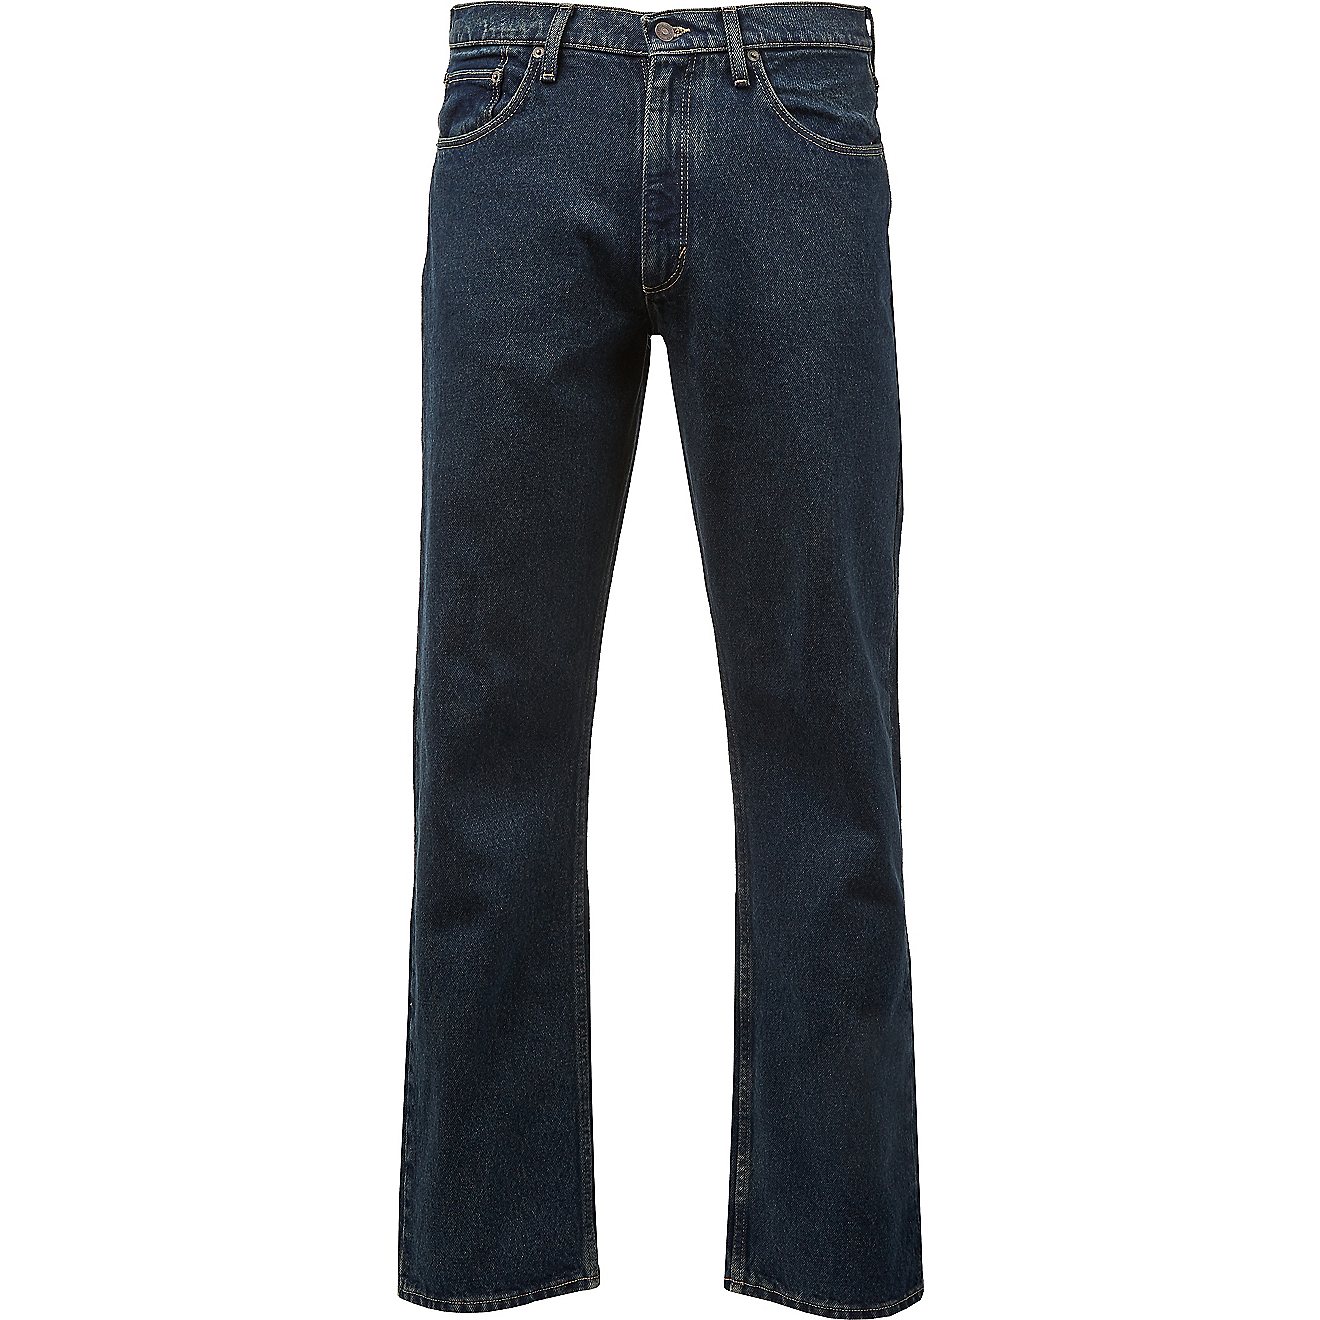 Magellan Outdoors Men's Relaxed Fit Jeans                                                                                        - view number 6